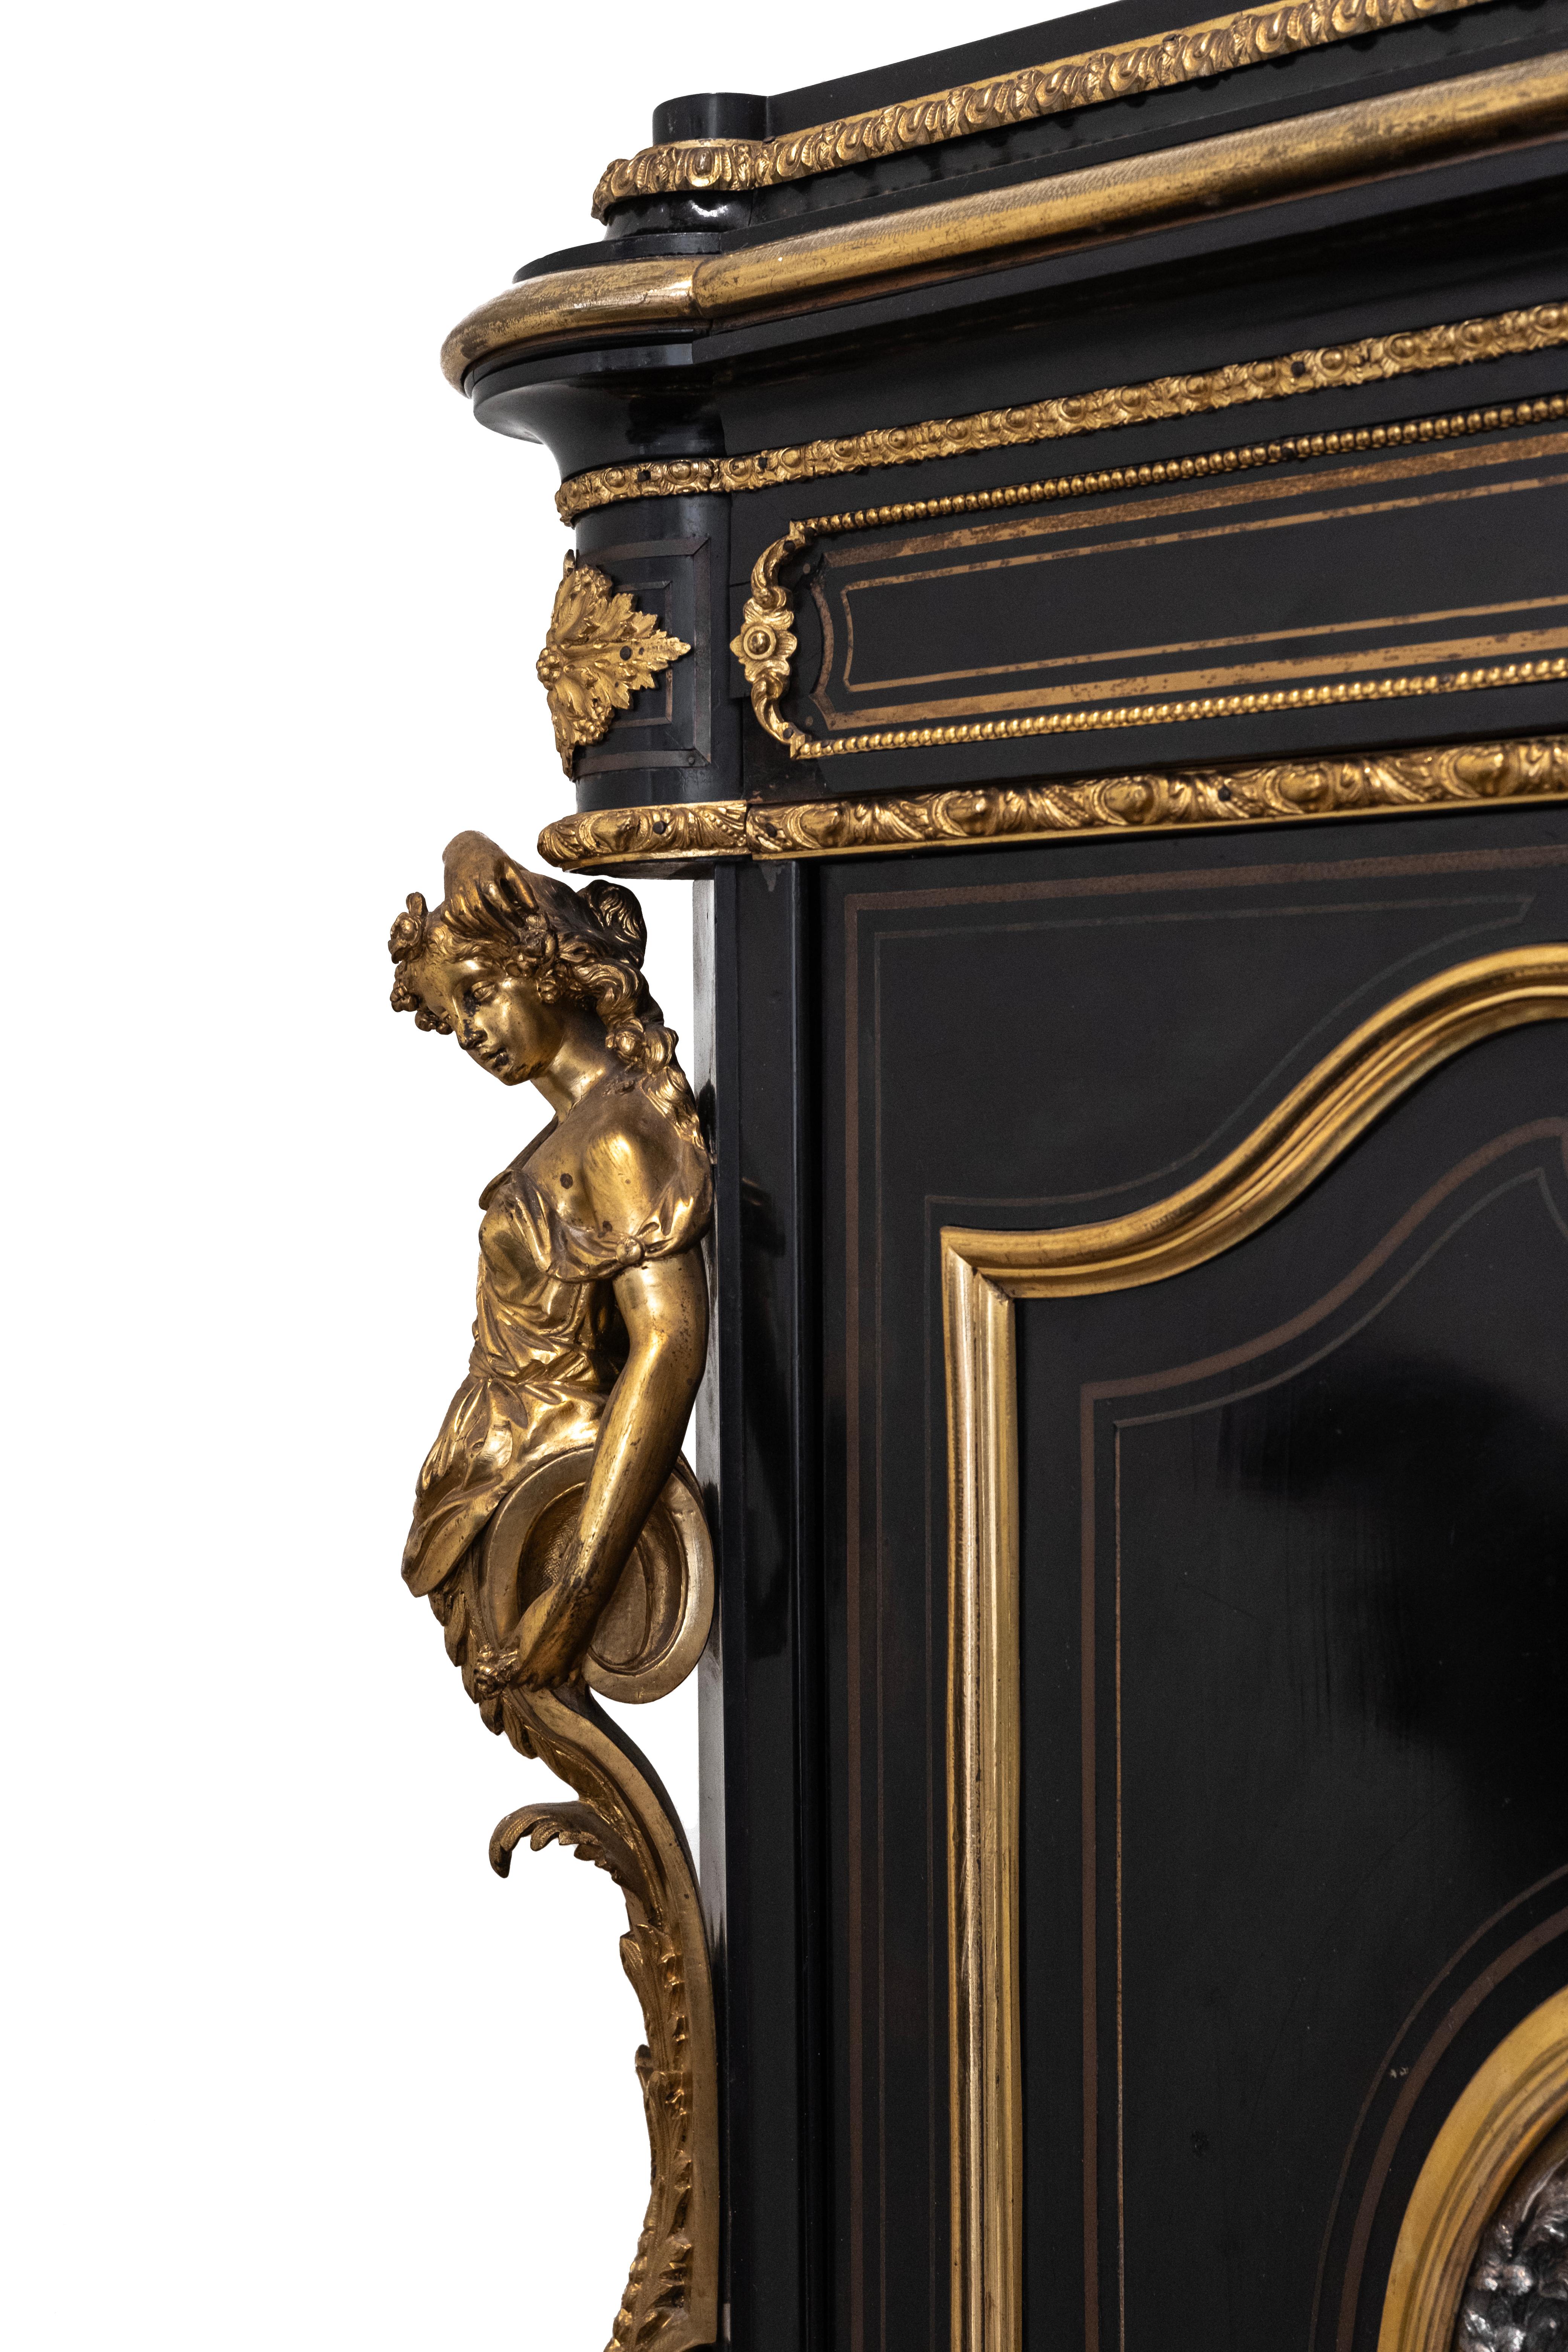 Napoleon III solid oak cabinet with ebony veneer and carved black marble top. The facade is framed with gilt bronze mounts of caryatids, and two doors are decorated with silver medallions, that depict cherubs playing in the garden. The interior is